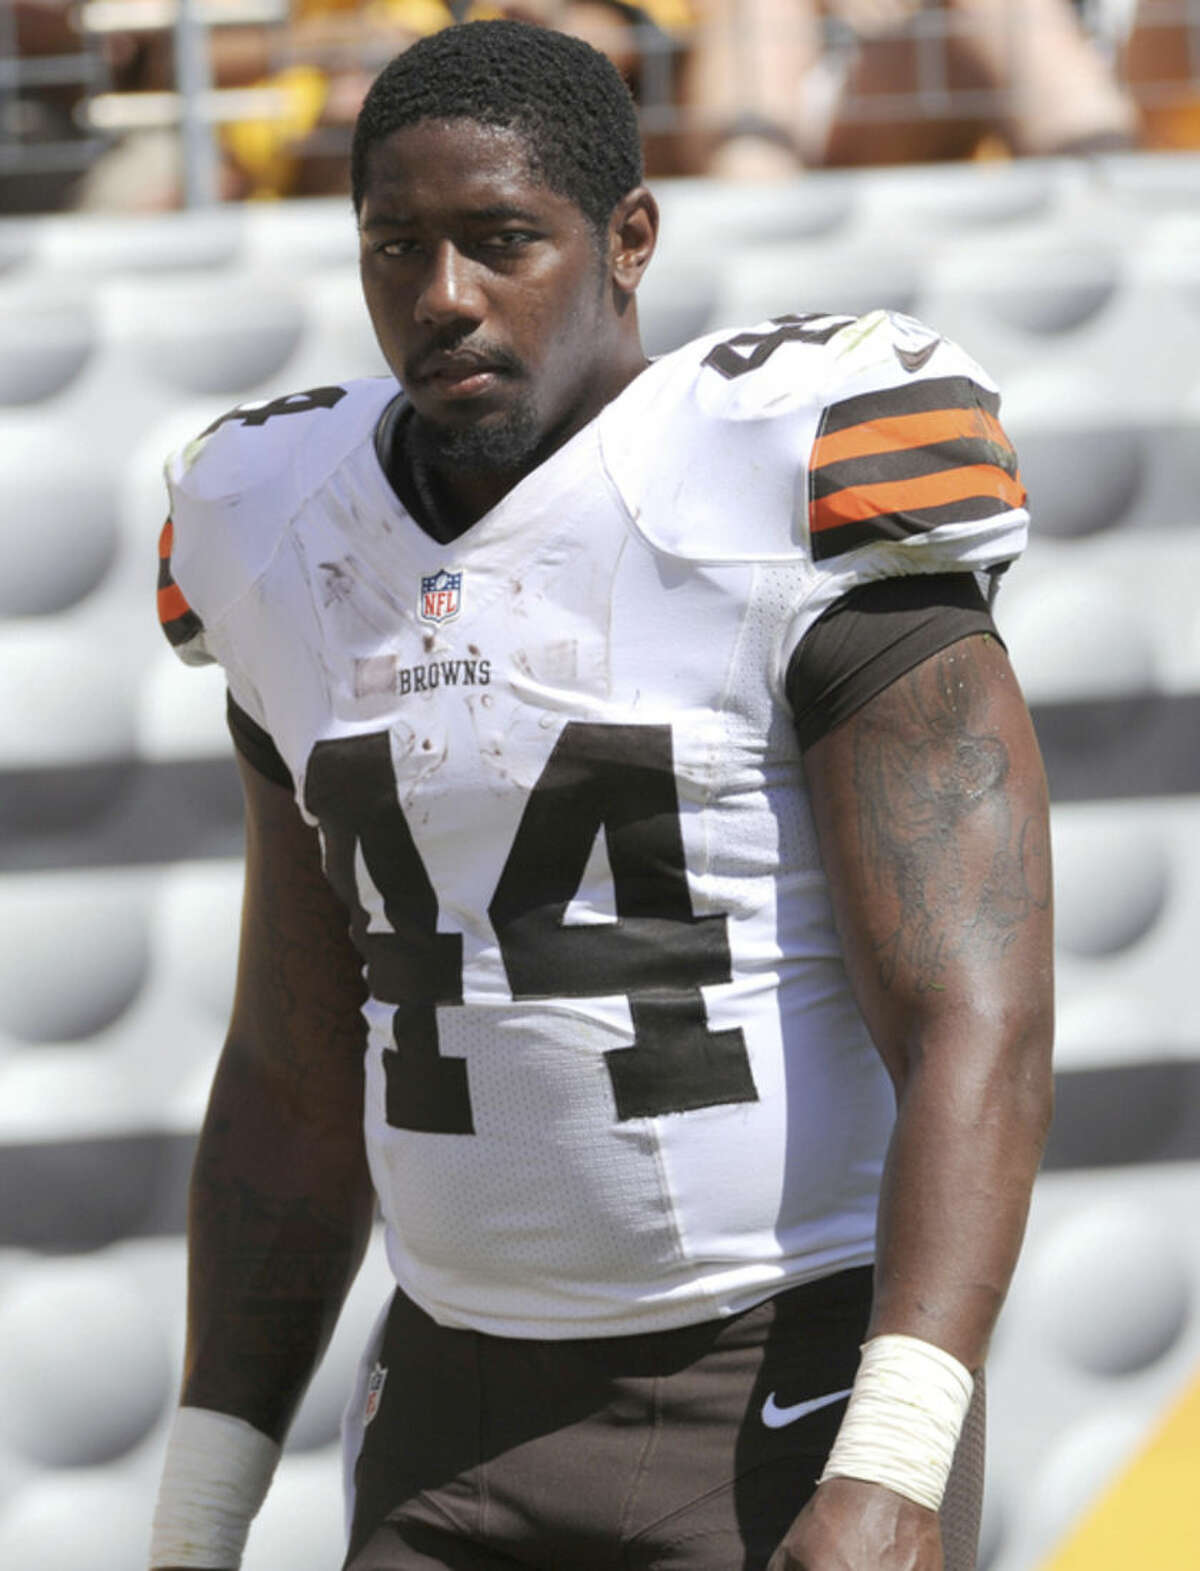 Cleveland Browns running back Ben Tate (44) leaves the field after being injured in the second quarter of the NFL football game against the Pittsburgh Steelers, Sunday, Sept. 7, 2014 in Pittsburgh. (AP Photo/Don Wright)